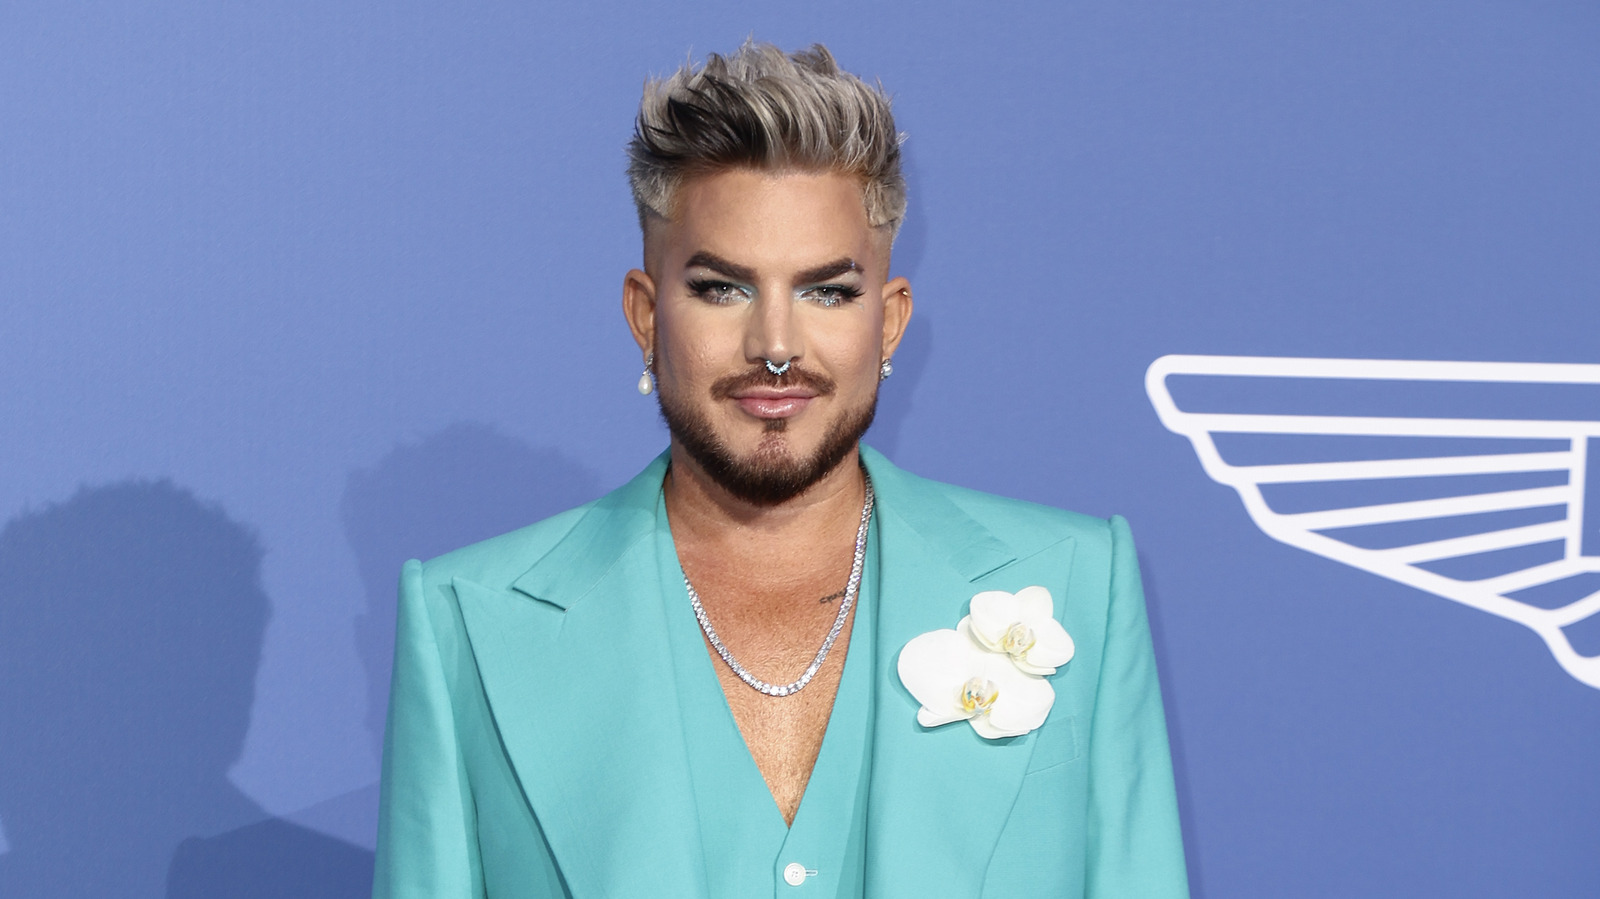 Adam Lambert Says Coming Out Is 'An Act Of Defiance' - Here's His Story